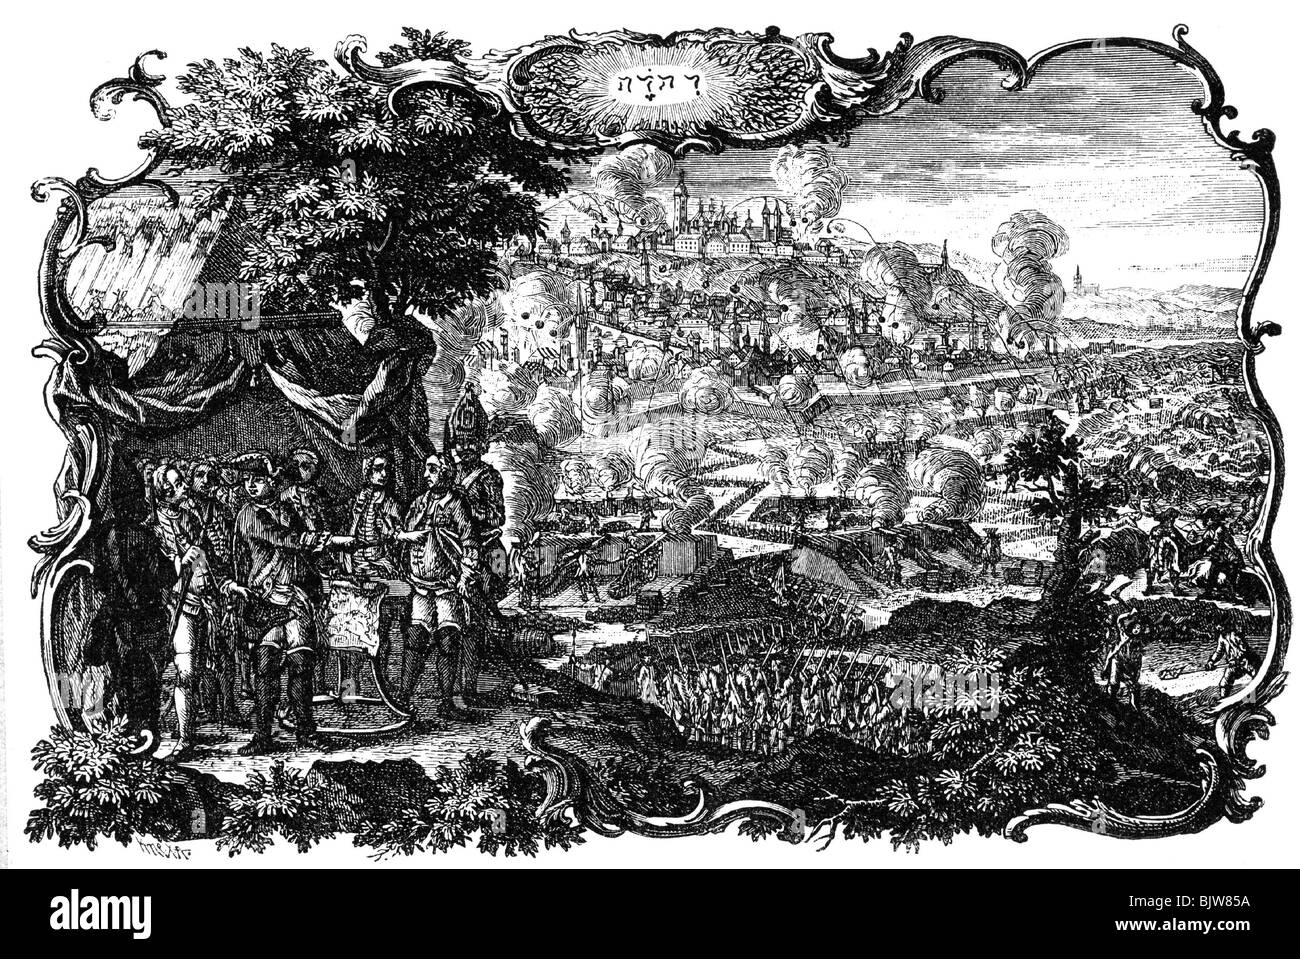 events, Seven Years War 1756 - 1763, Siege of Prague, 7.5.- 19.6.1757, etching by Johann Adolf Stockmann, 2nd half 18th century, Bohemia, Austria, Prussia, Prussians, Czechia, historic, historical, people, Stock Photo